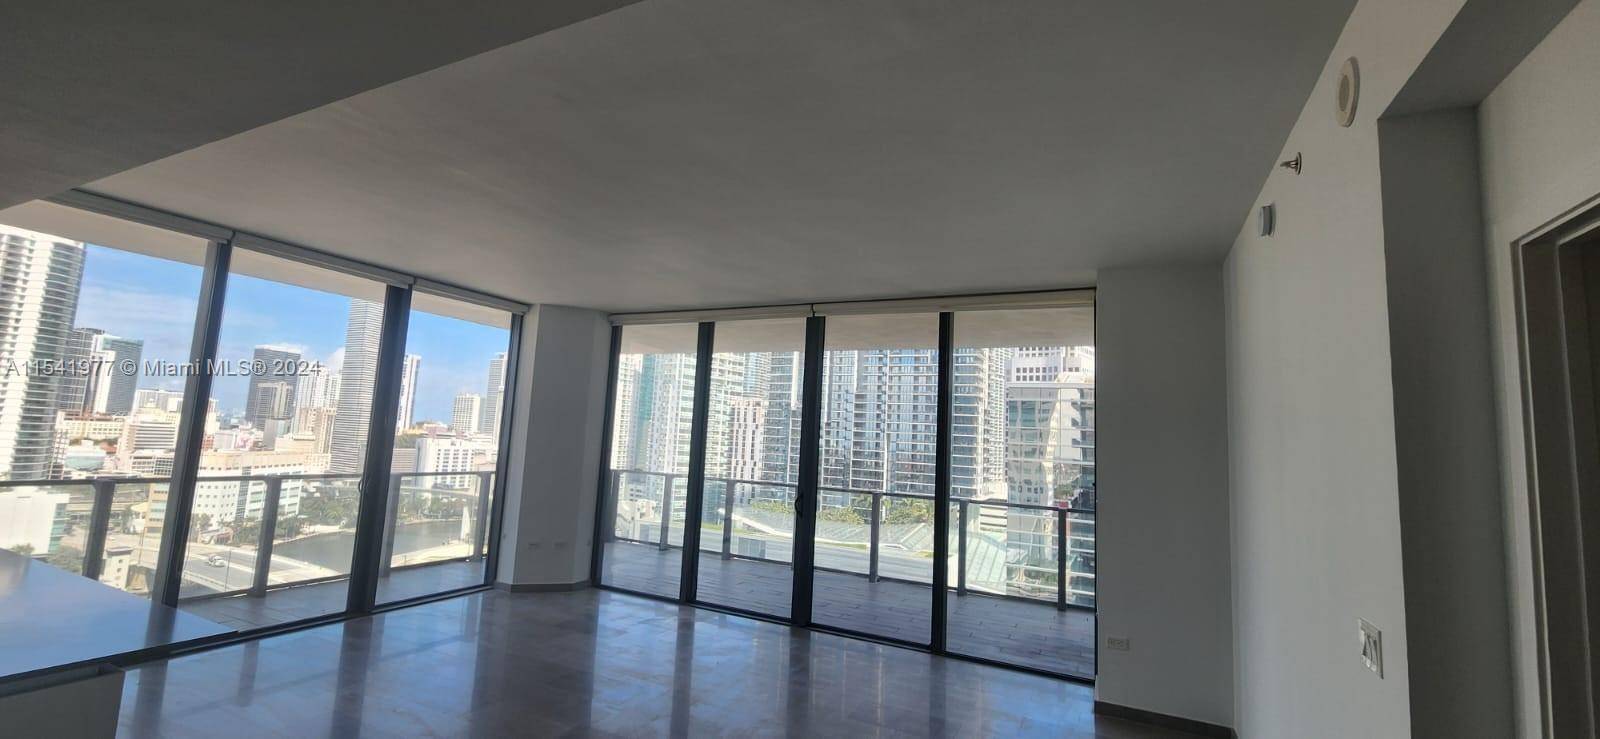 Ascend to refined living at Rise Brickell's 15th floor apartment.